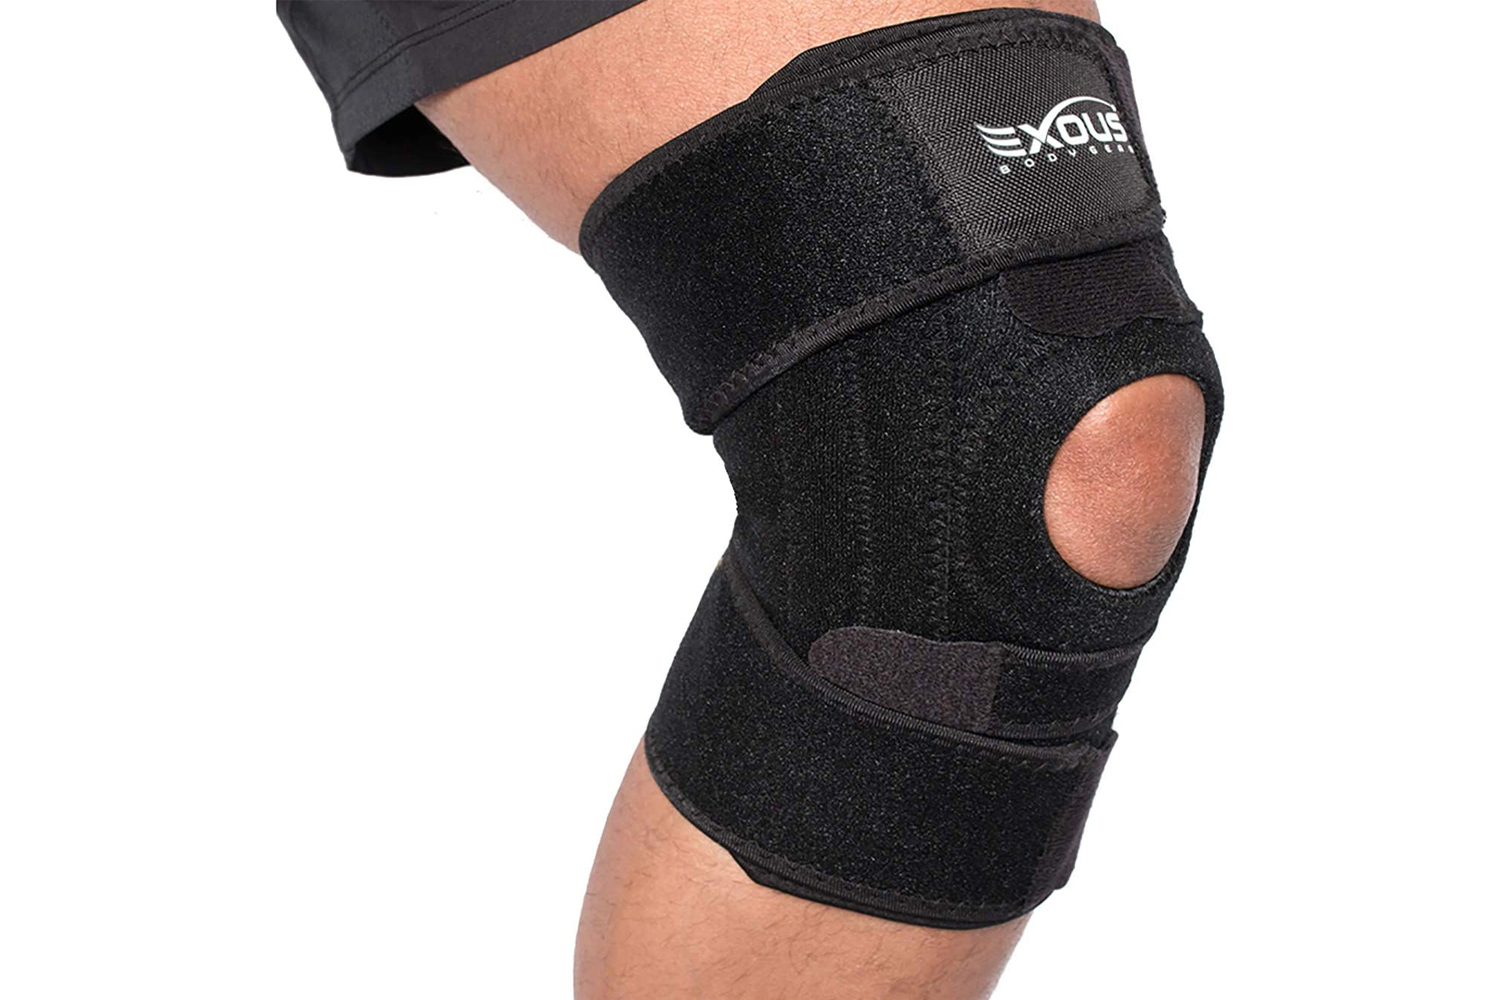 Knee Support Open Patella runners knee compression support brace sleeve LP758 